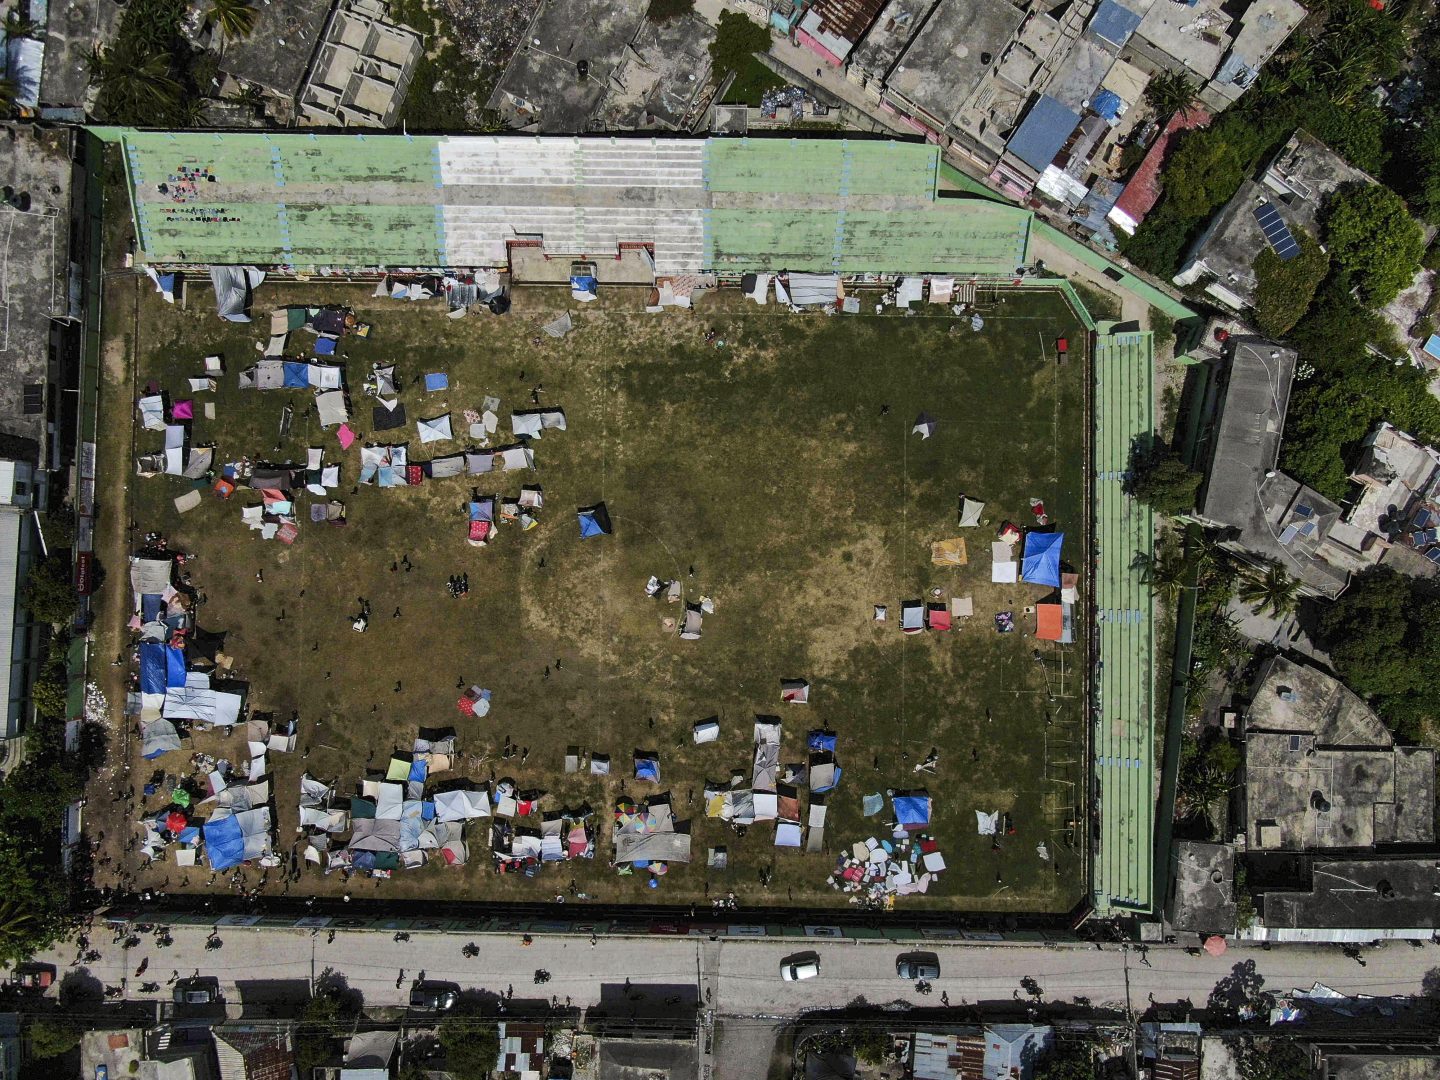 Residents whose homes were damaged during the earthquake campout at a soccer field in Les Cayes, Haiti, Monday, Aug. 16, 2021.